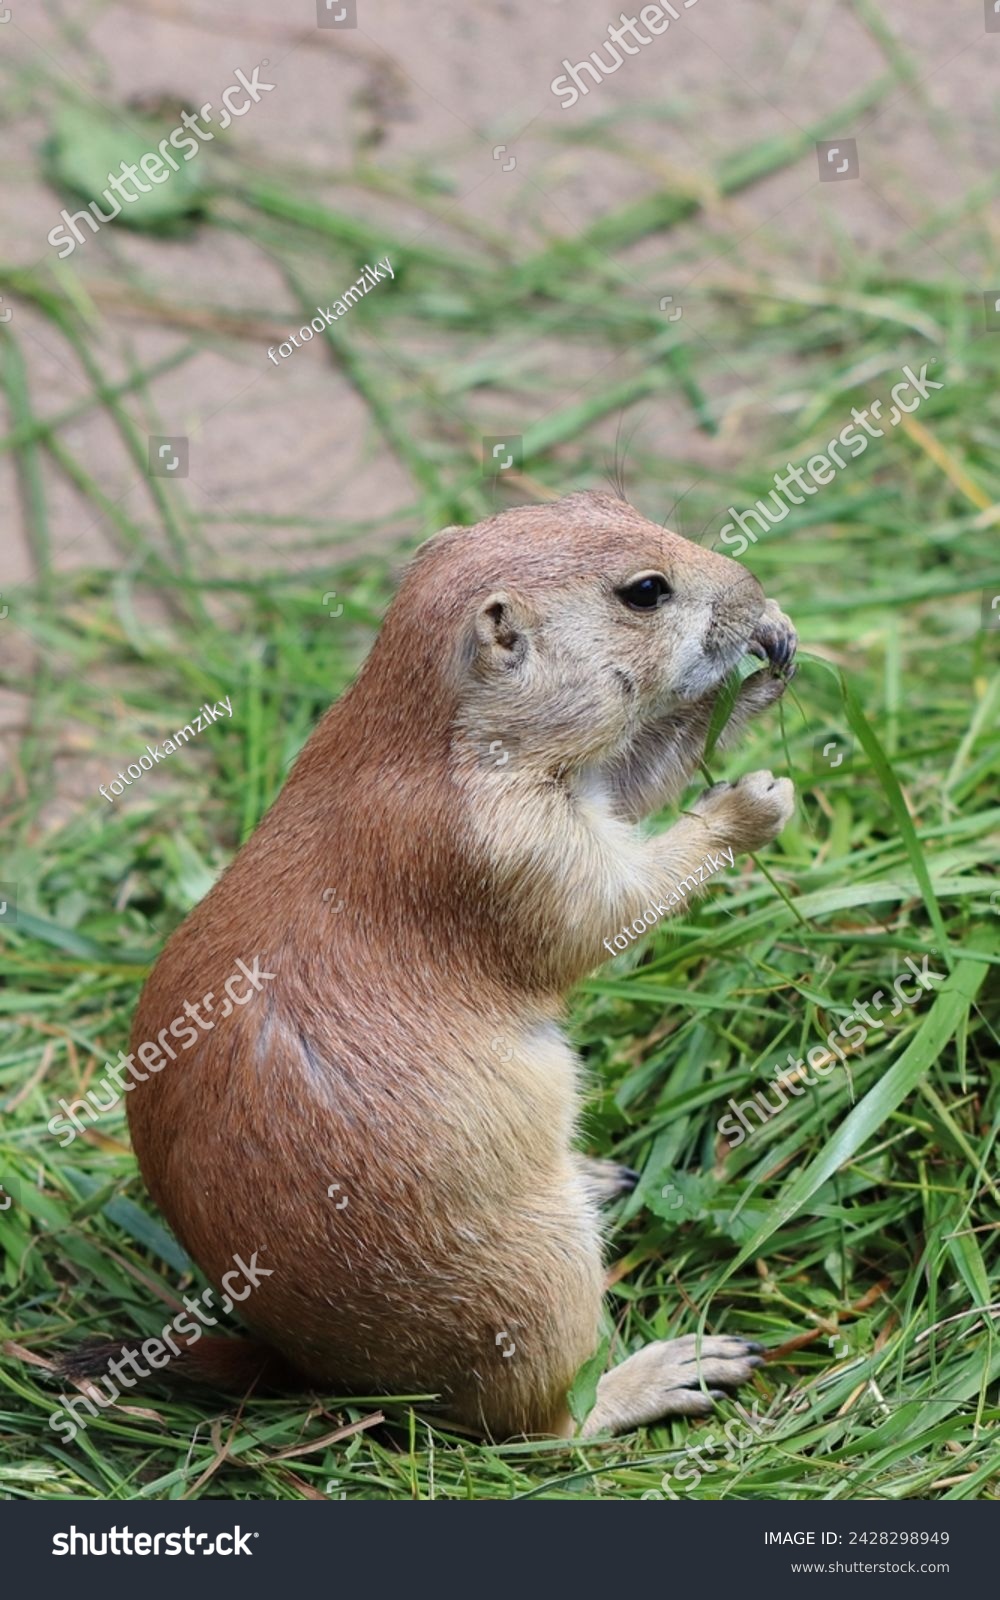 Cynomys ludovicianus, a diurnal rodent, eats grass in the zoo #2428298949